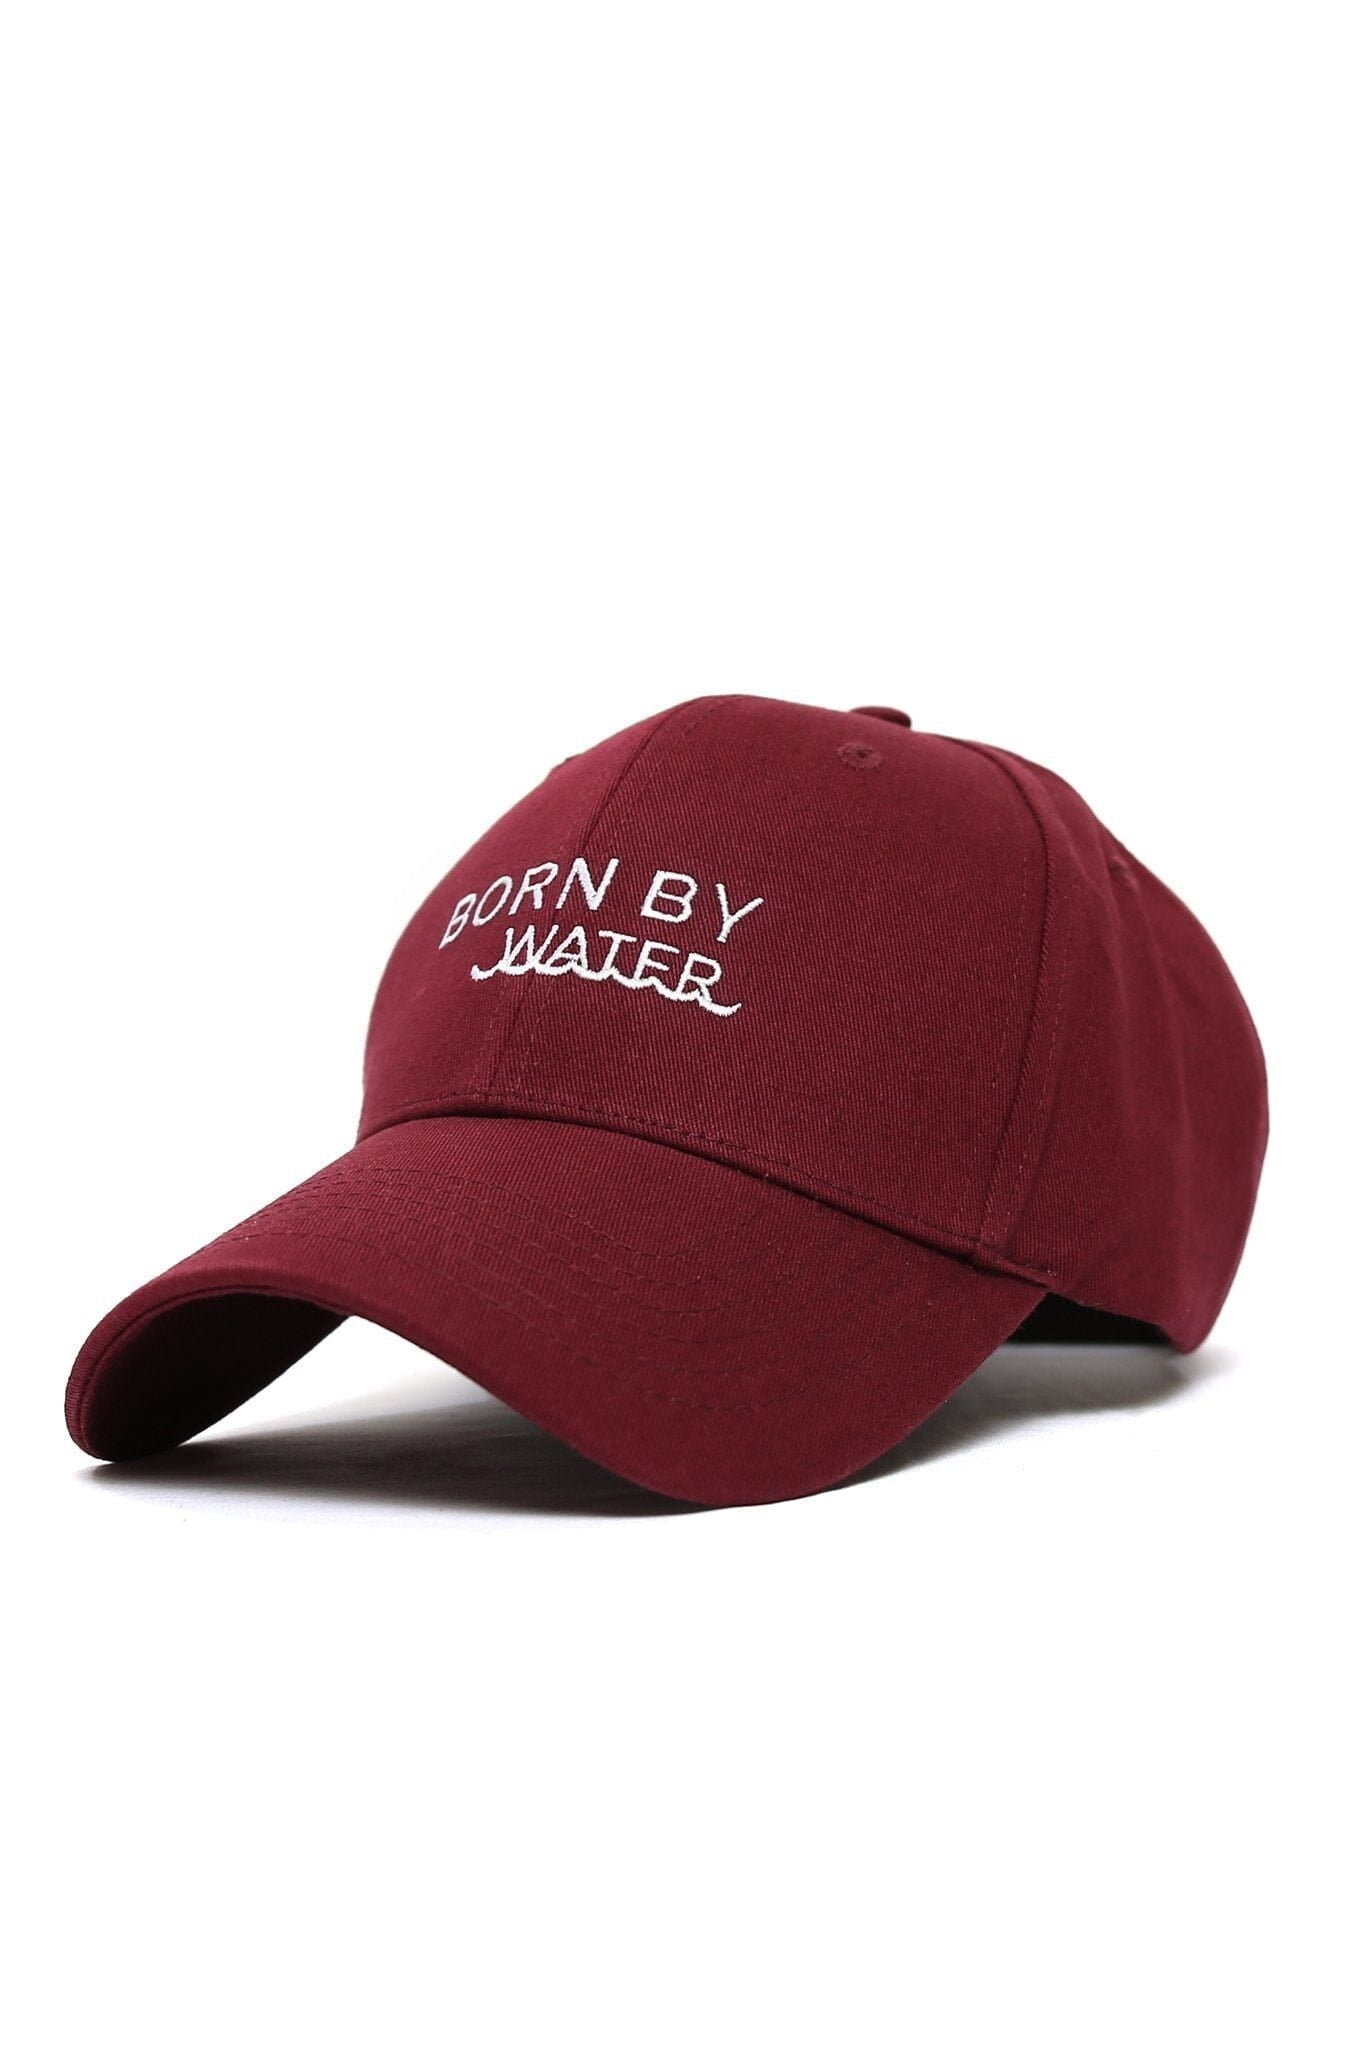 BORN BY WATER WAVES CAP - R-BURGUNDY - OS